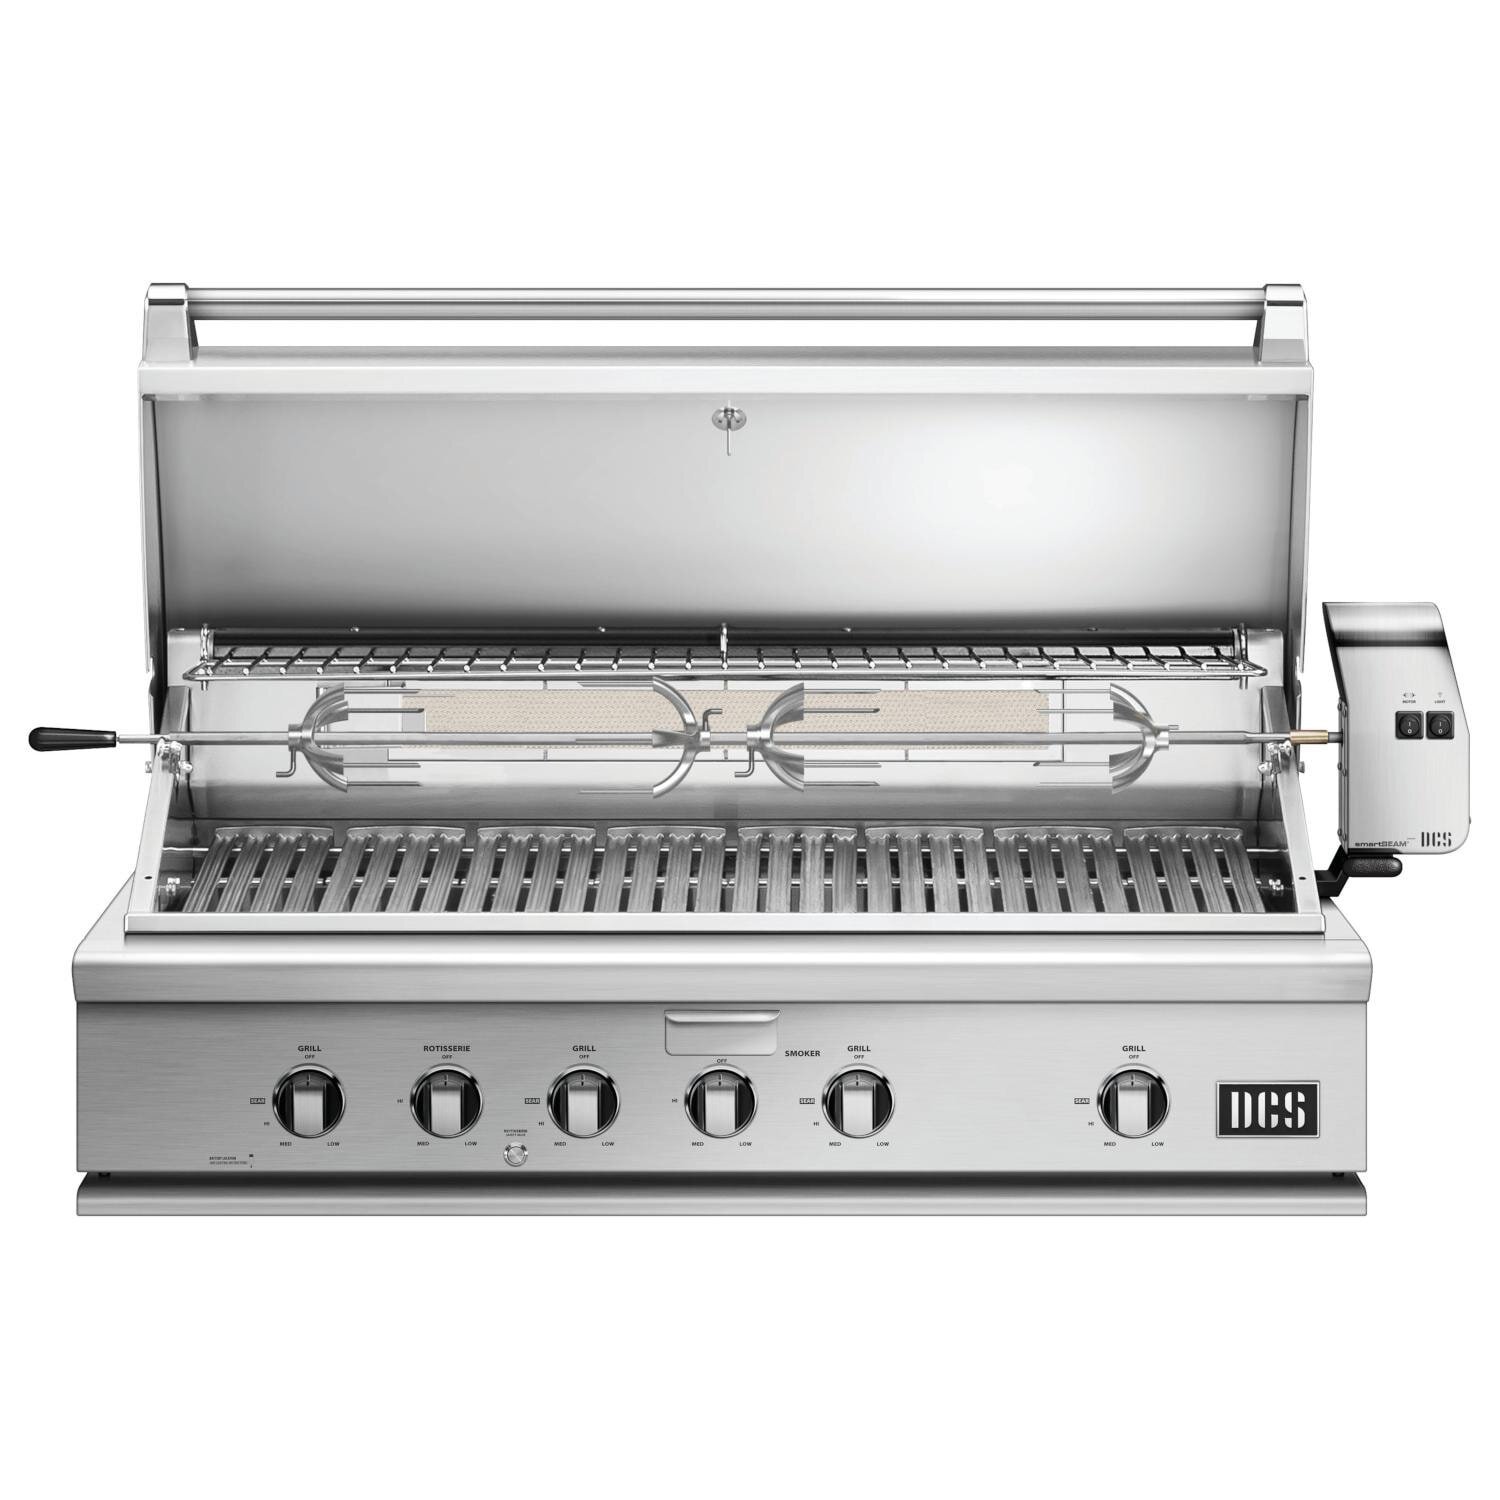 Reoka rkg d201. Natural Gas Grill. Виды грилей. Supply Grill (with damper). 48» Grill Cover.